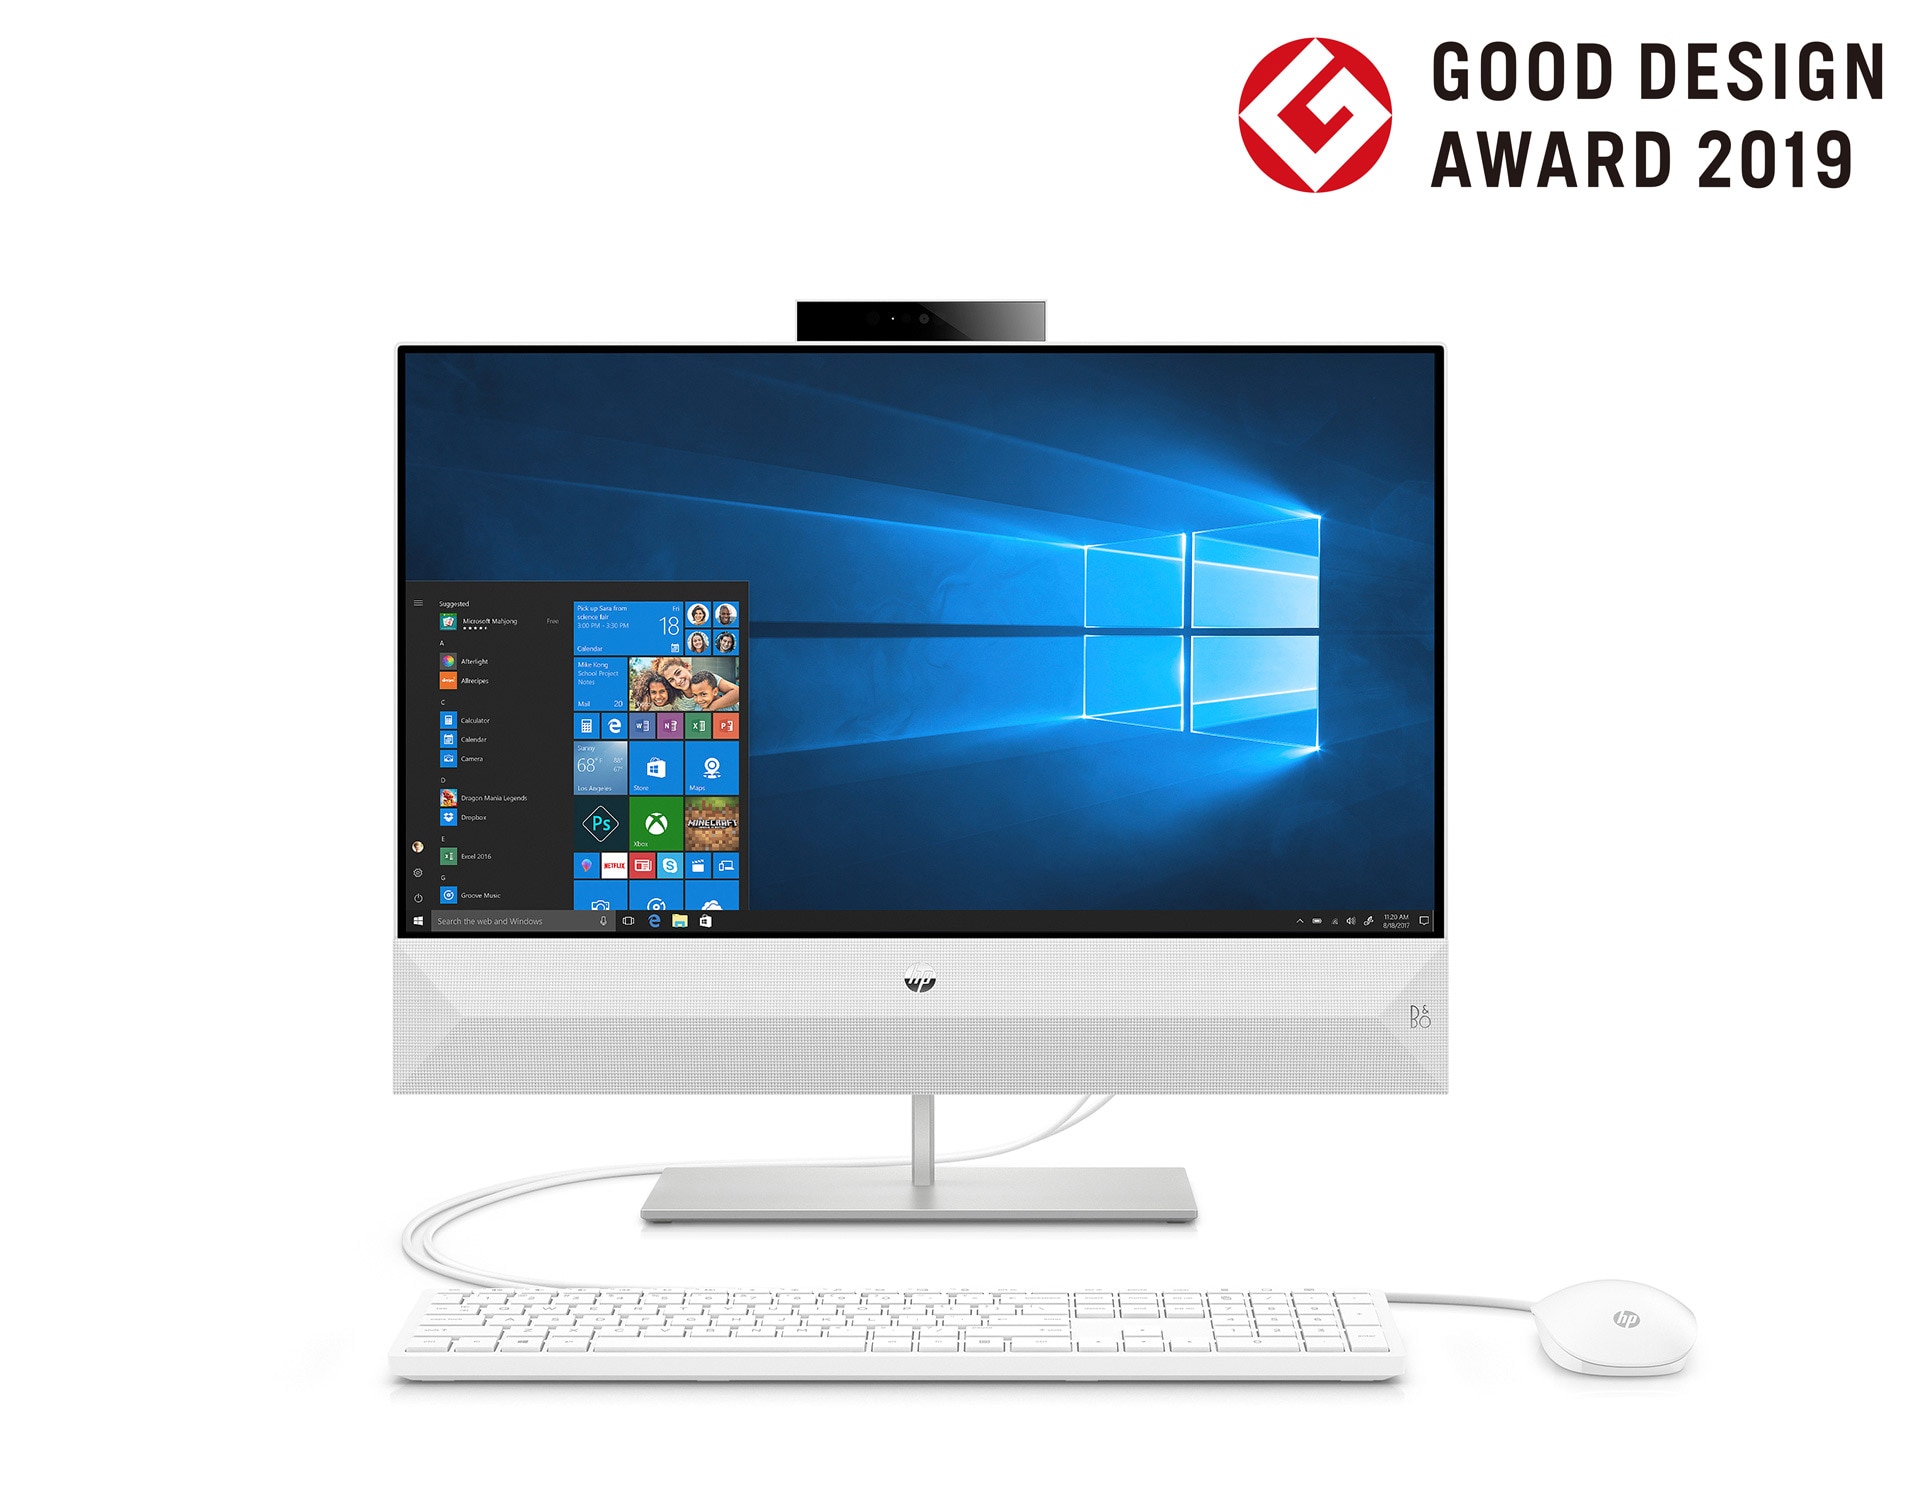 HP Pavilion All-in-One 24（AMD）